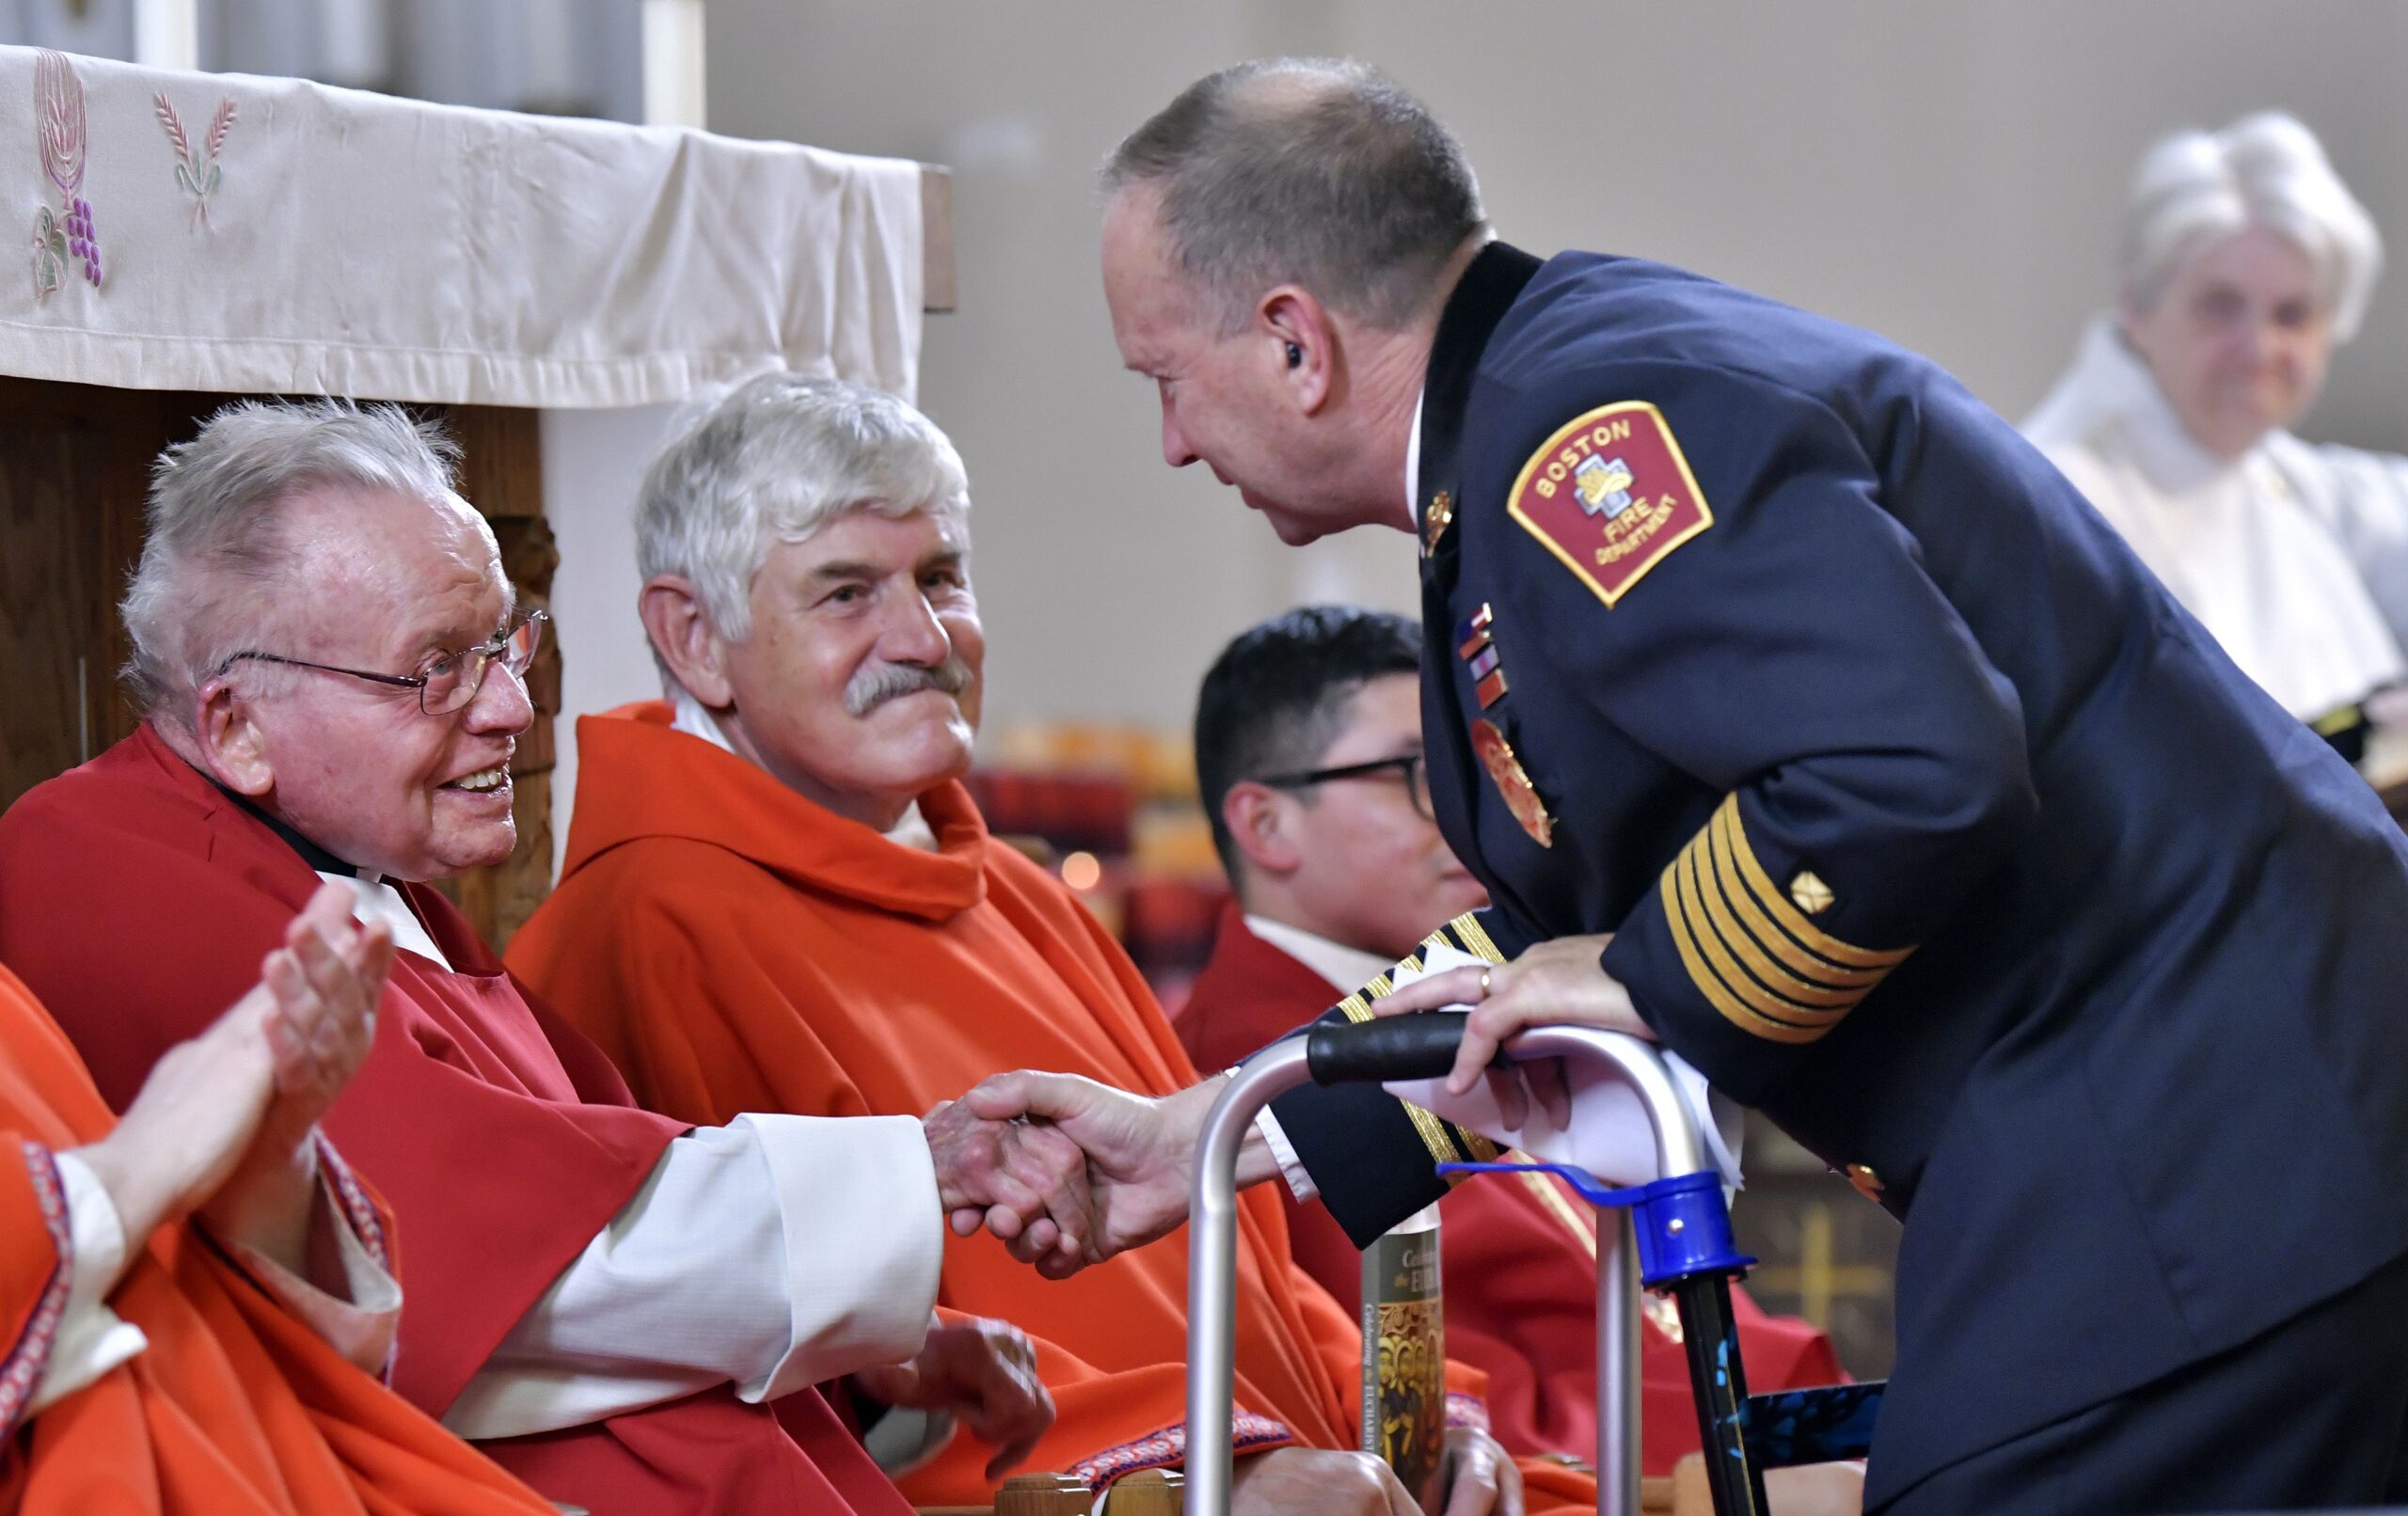 Boston fire department chaplain retires after 60 years, honored by community